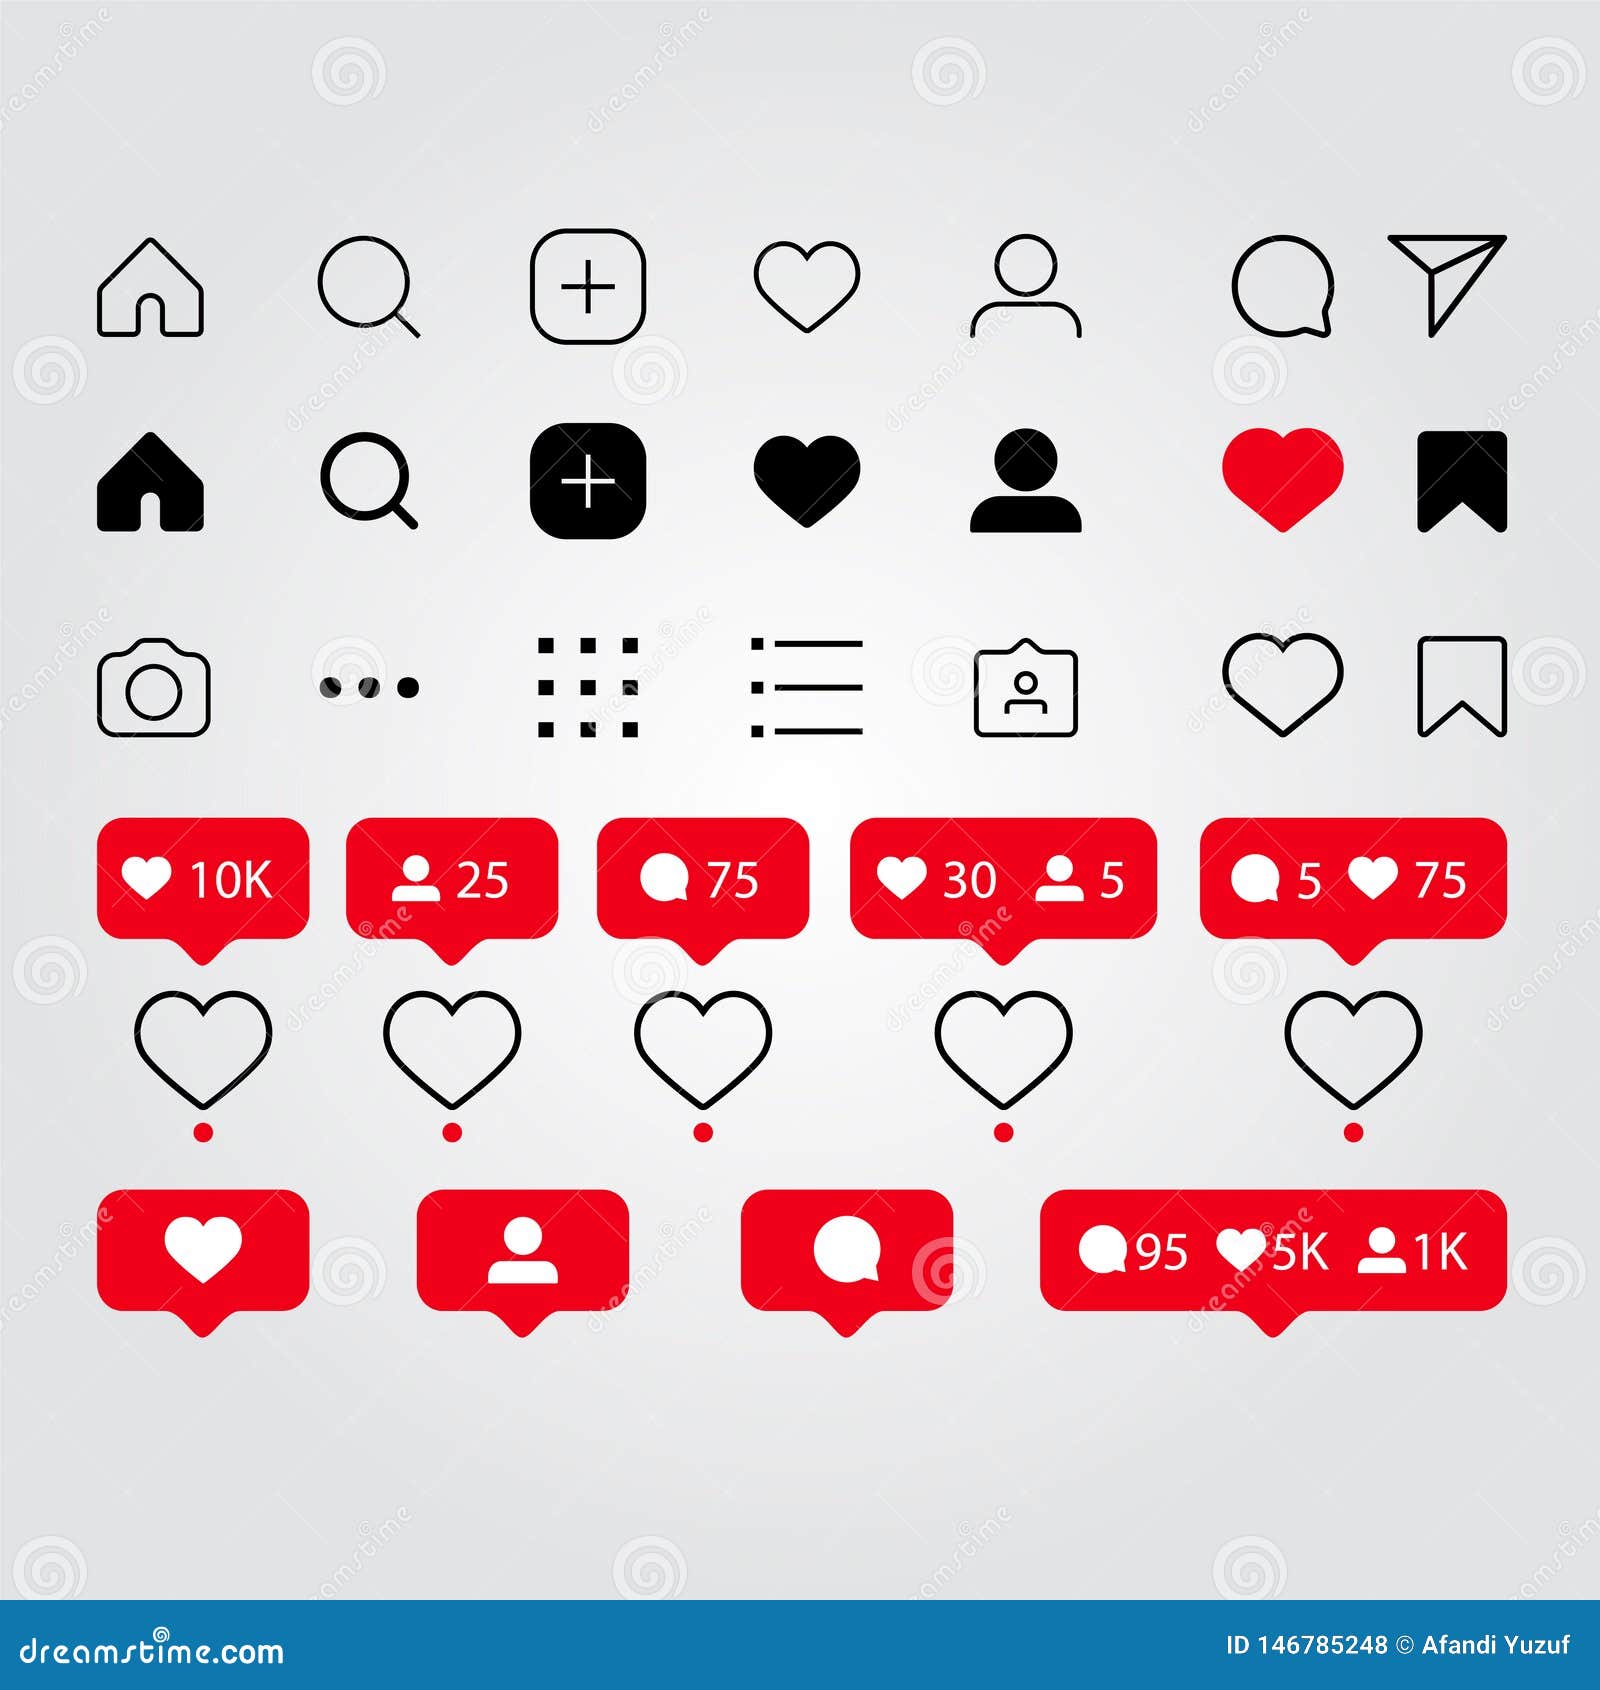 set of social media icons inspired by instagram: like, follower, comment, home, camera, user, search.   with whi